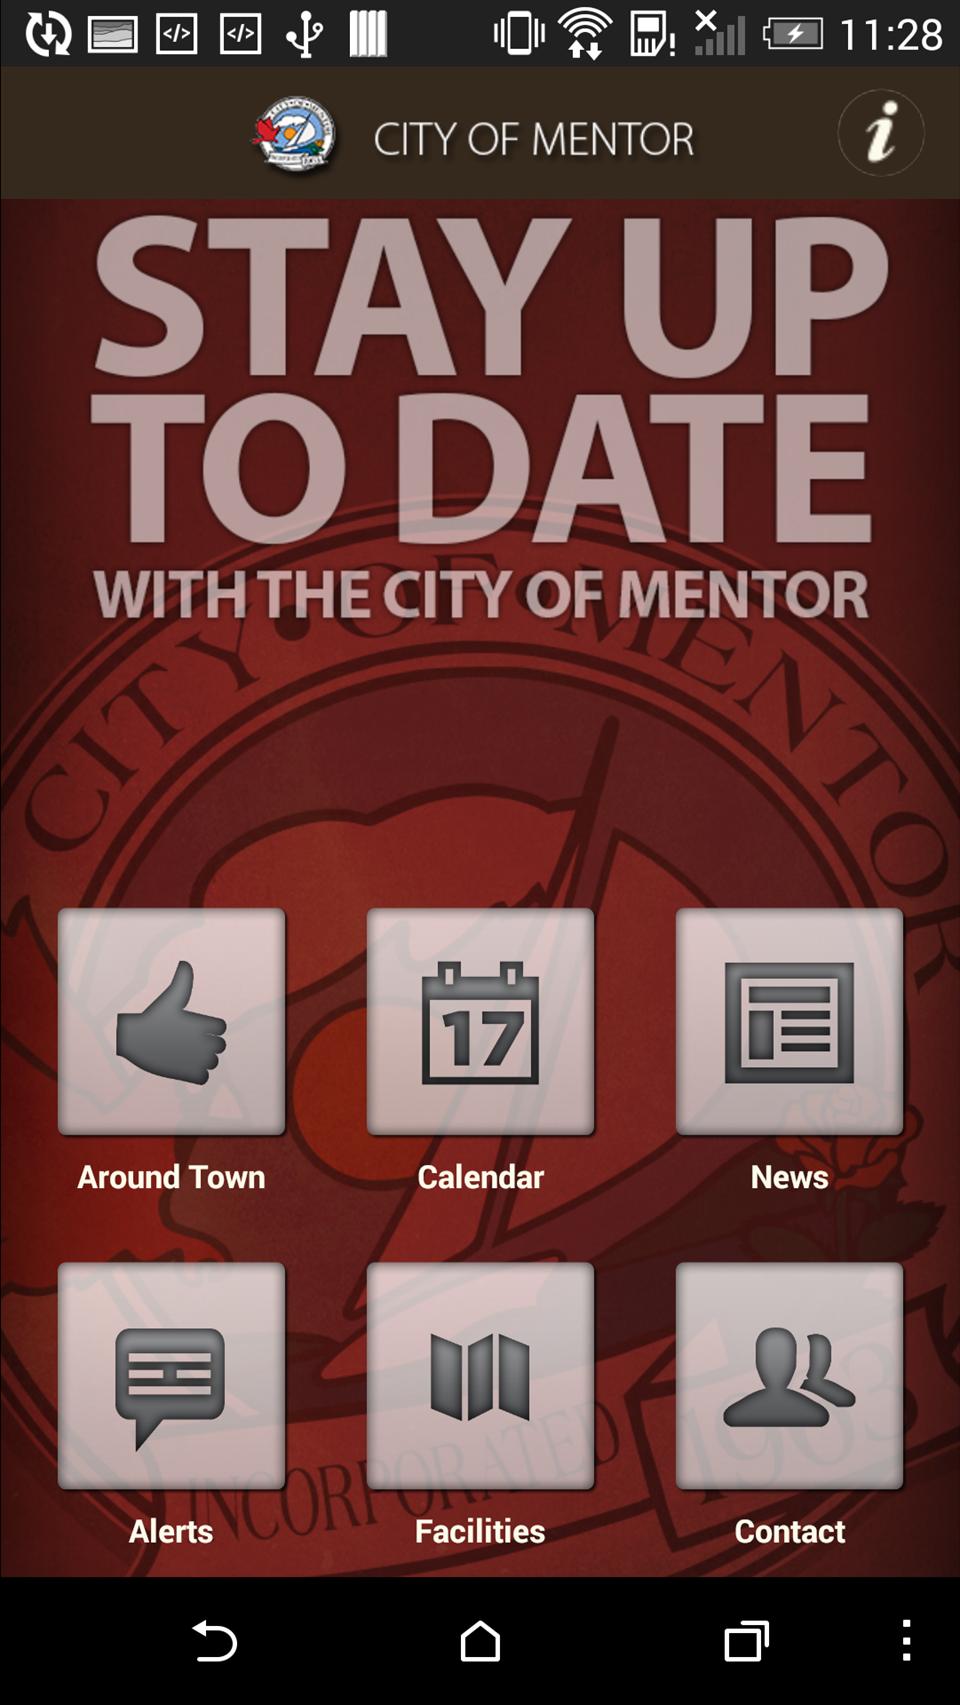 City of Mentor, Ohio for Android - APK Download